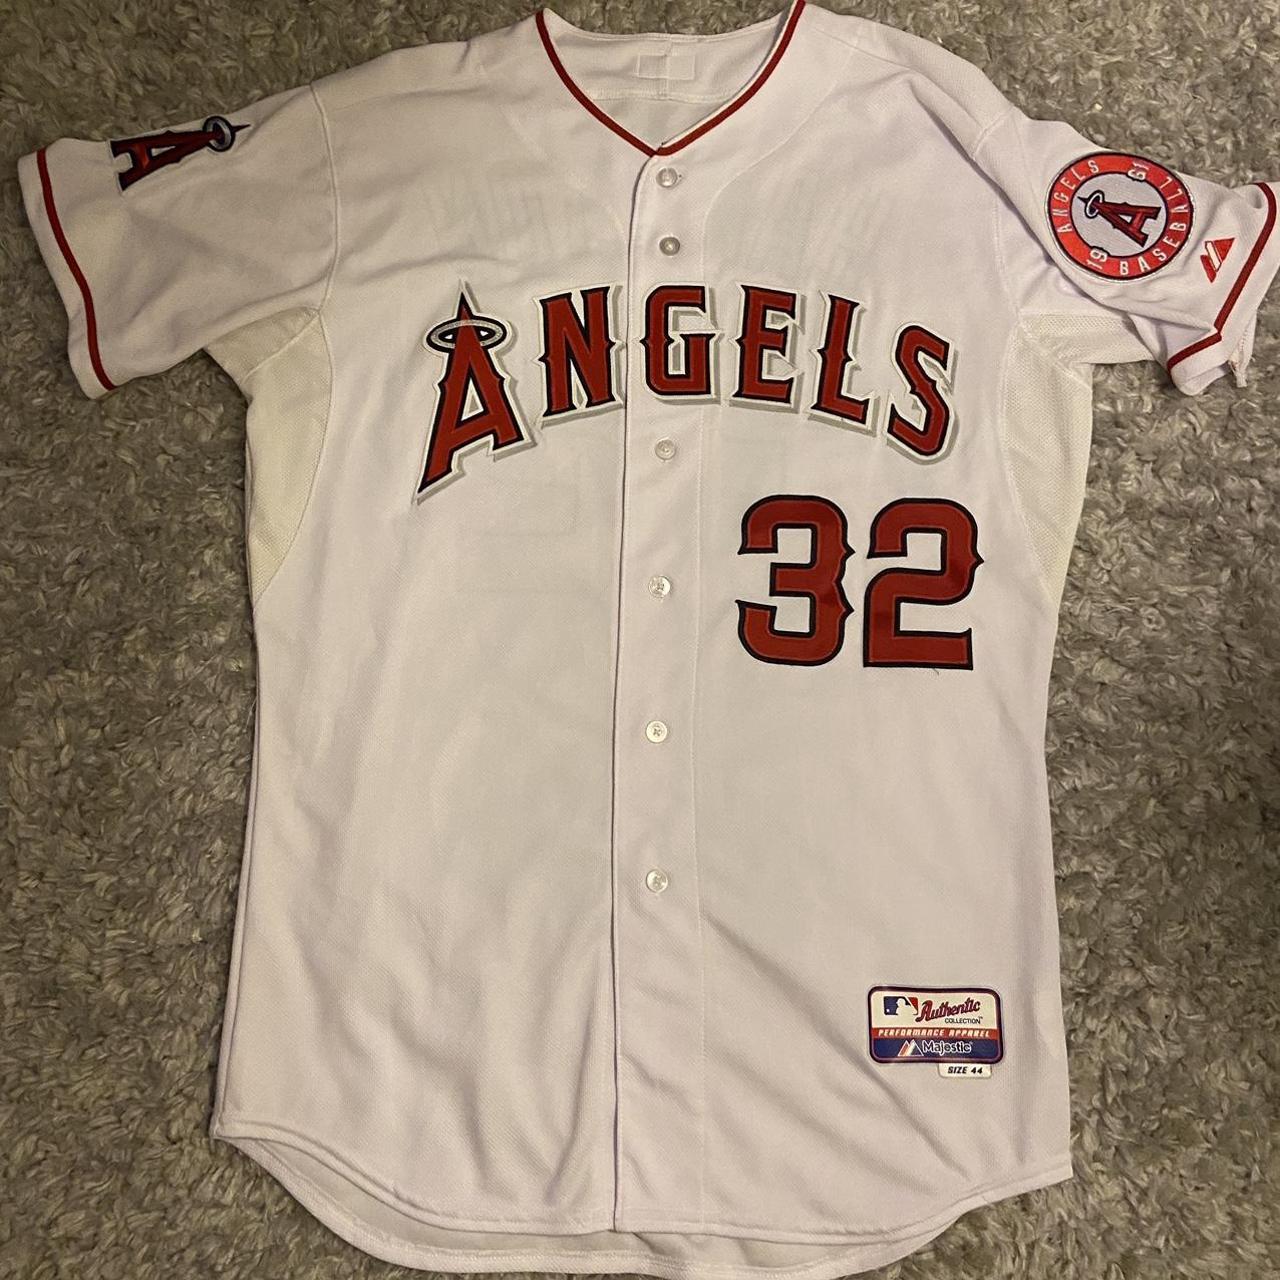 Official Los Angeles Angels Majestic Jerseys, Angels Majestic